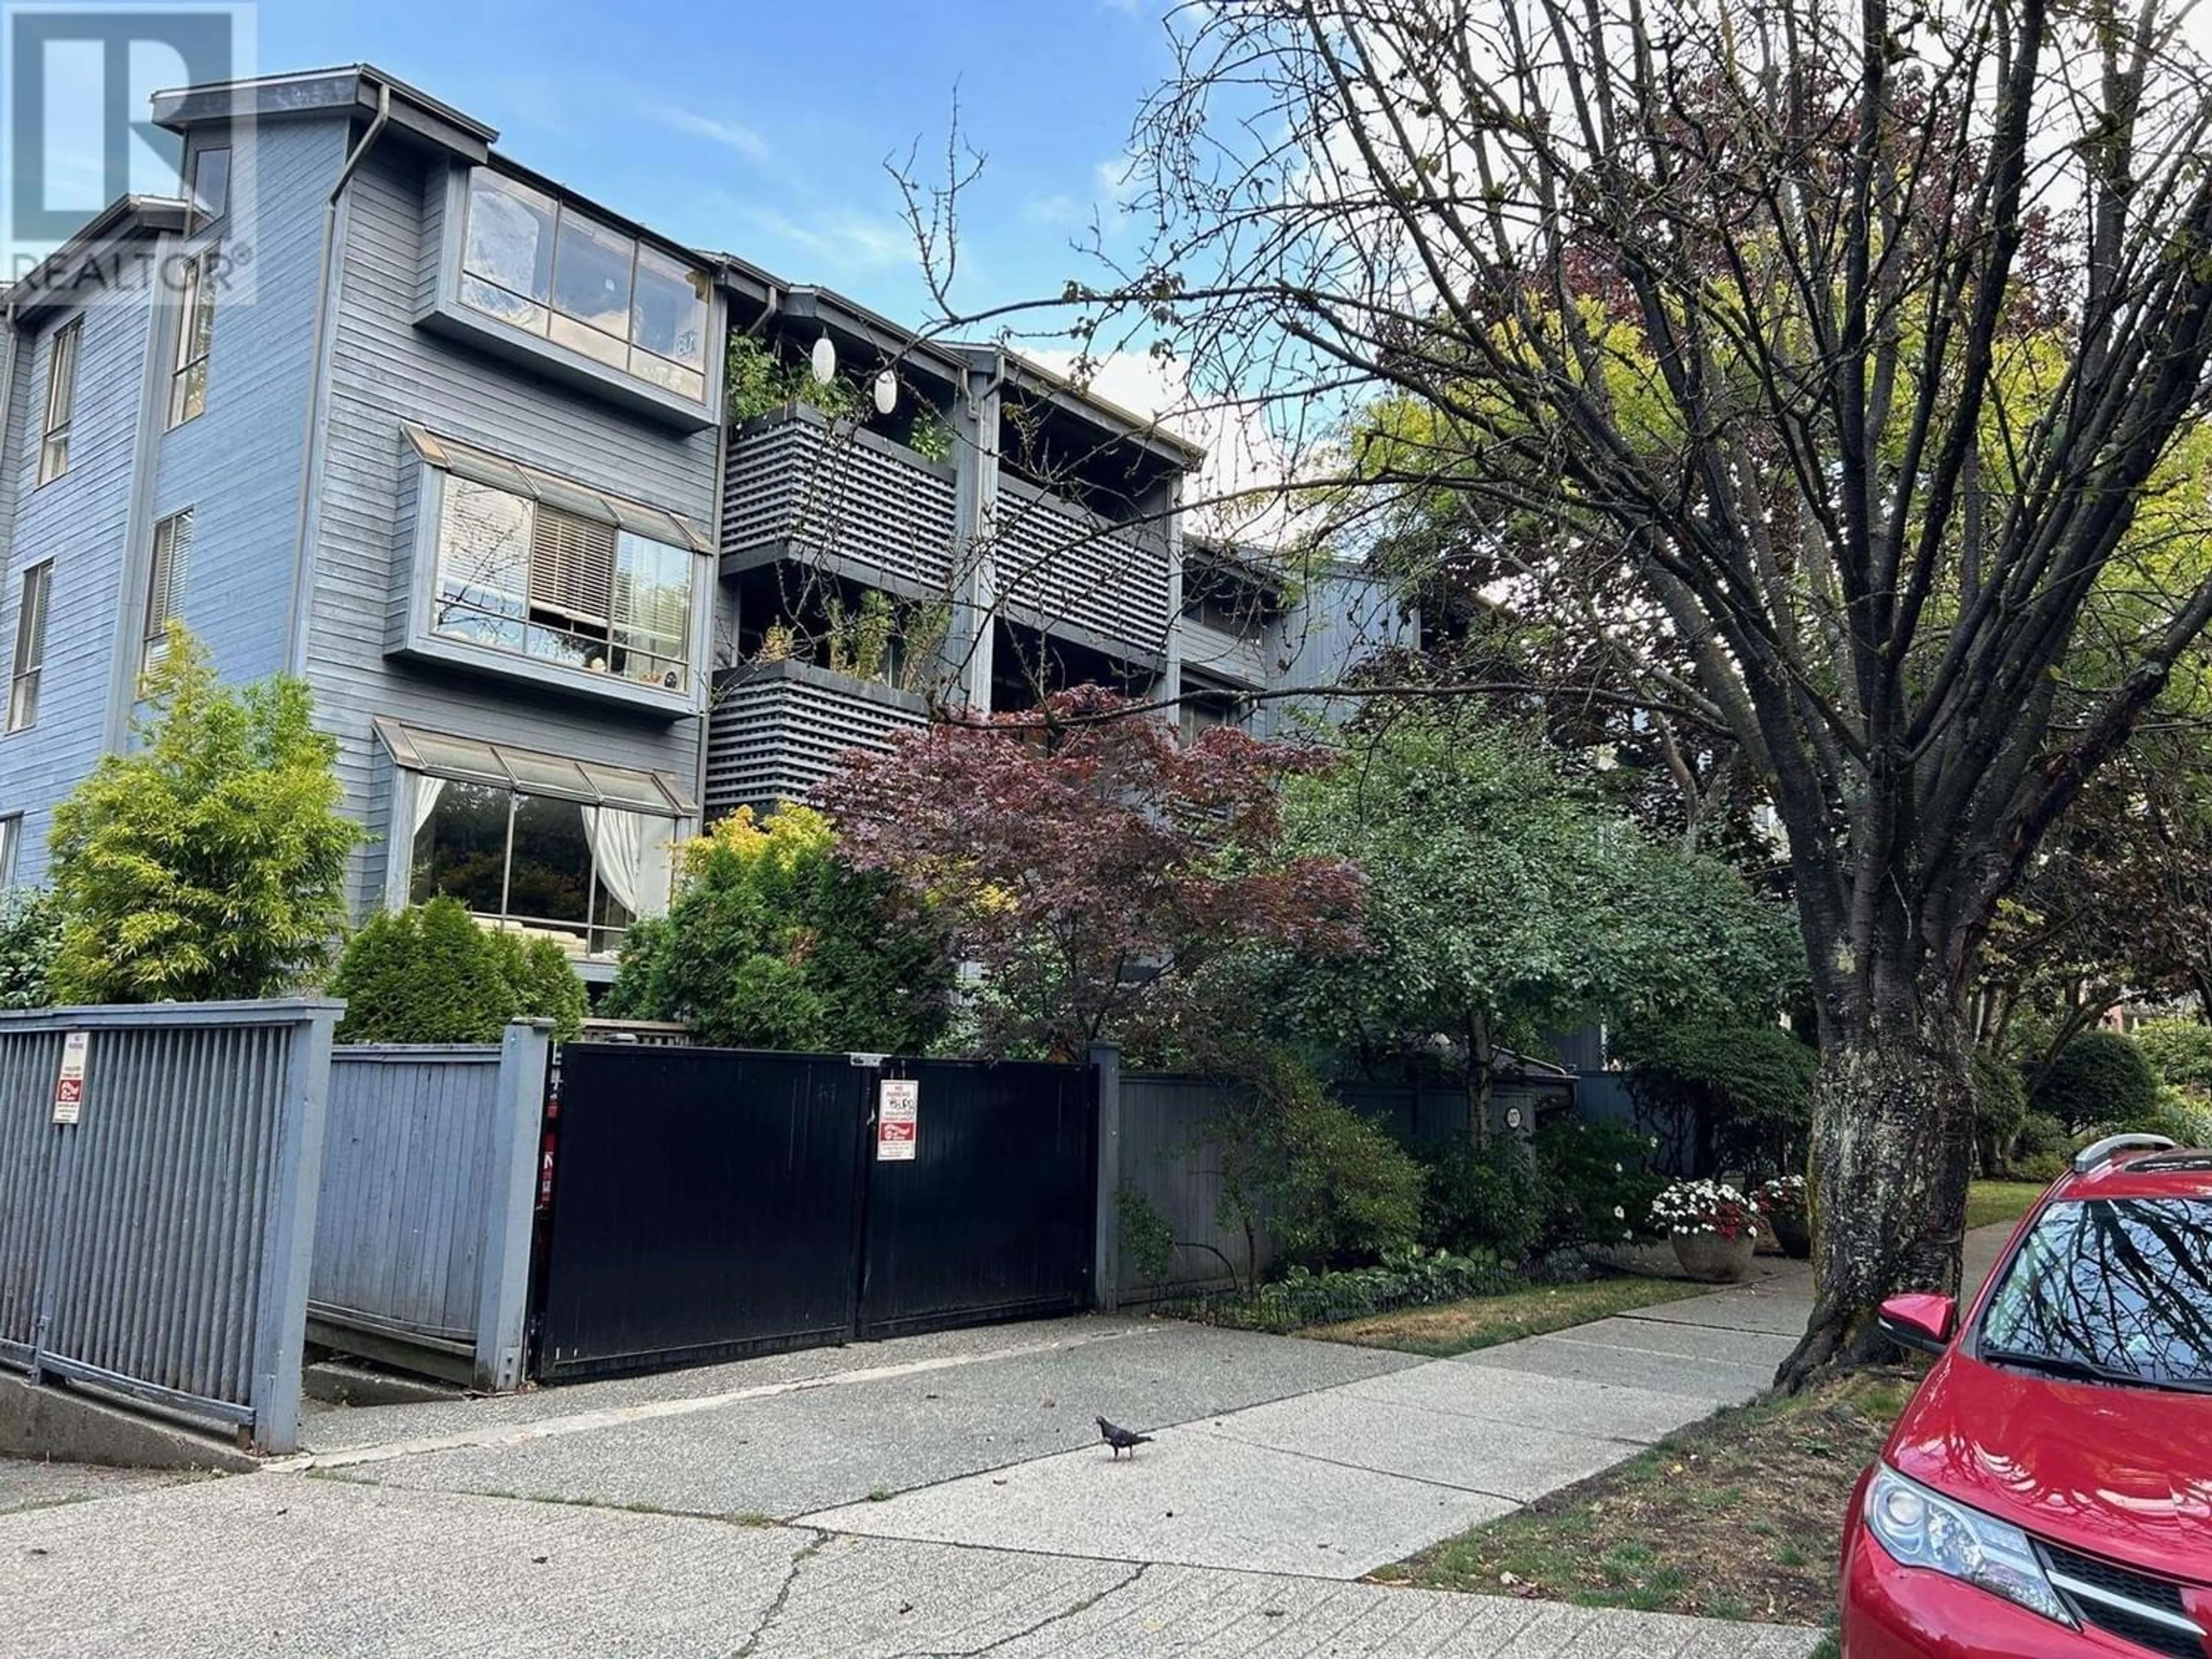 A pic from exterior of the house or condo for 310 2173 W 6TH AVENUE, Vancouver British Columbia V6K1V5